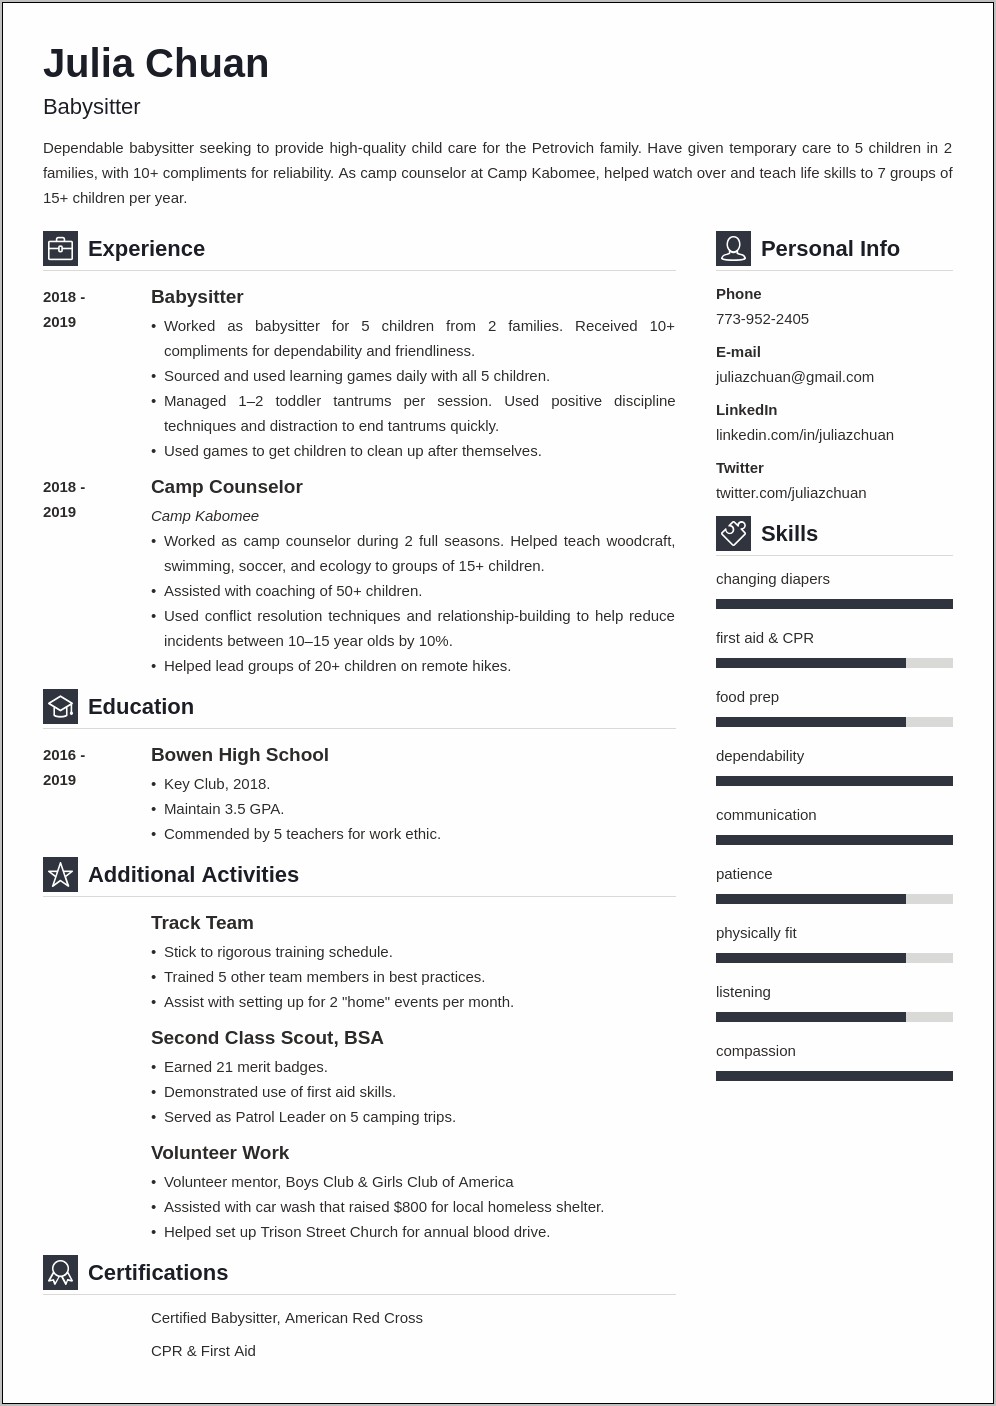 Adding That I Worked Remotely To A Resume